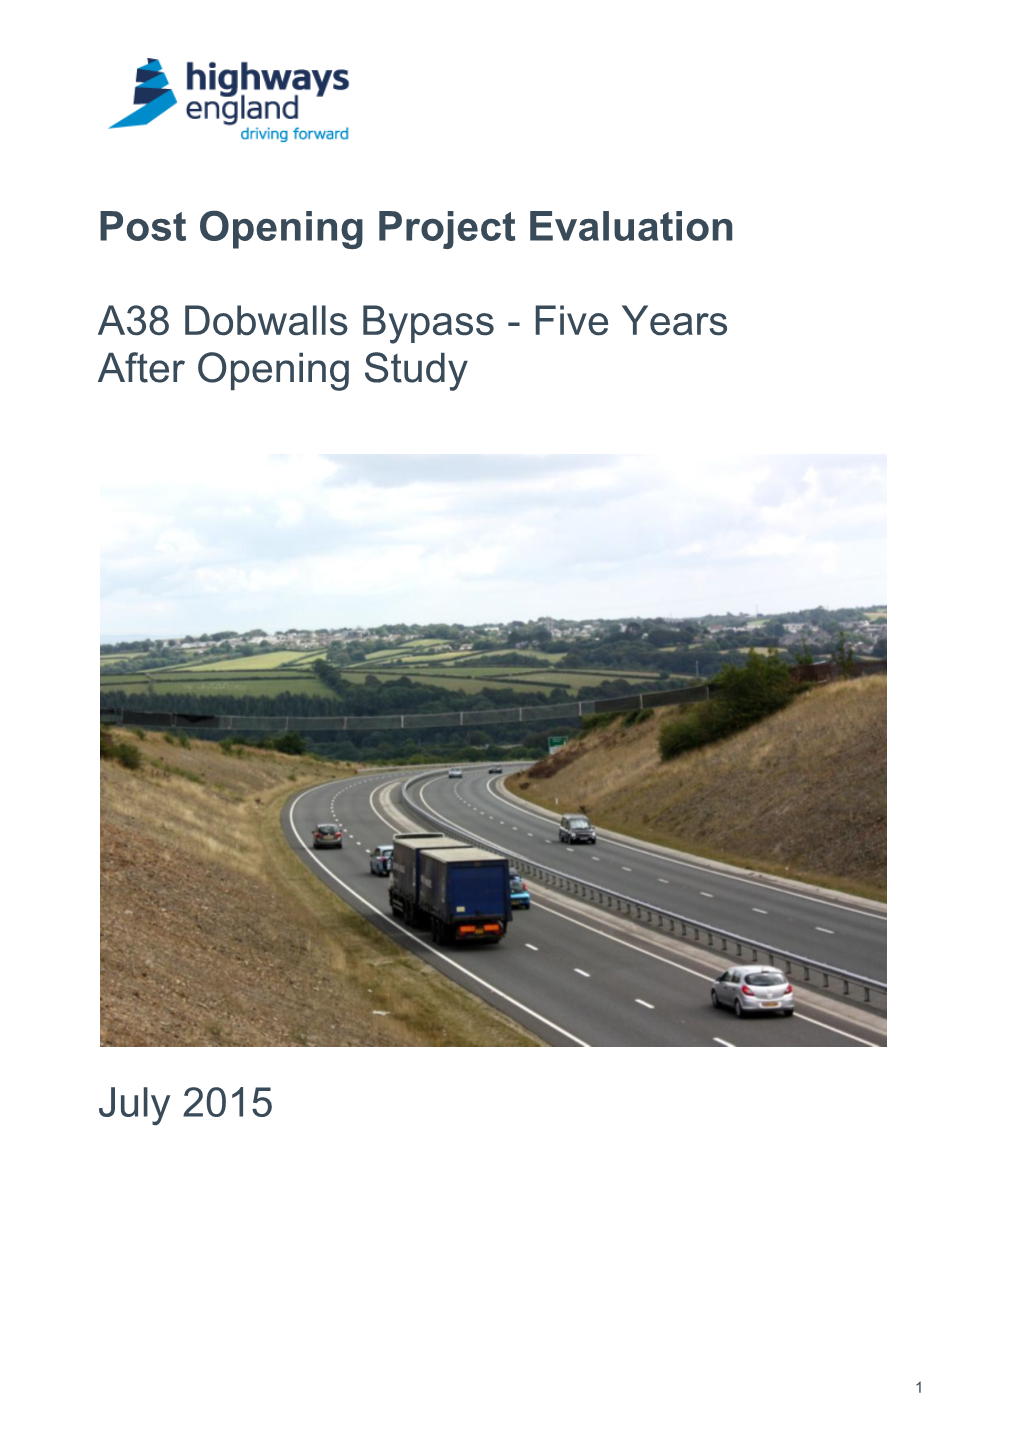 Post Opening Project Evaluation A38 Dobwalls Bypass – Five Years After Opening Study